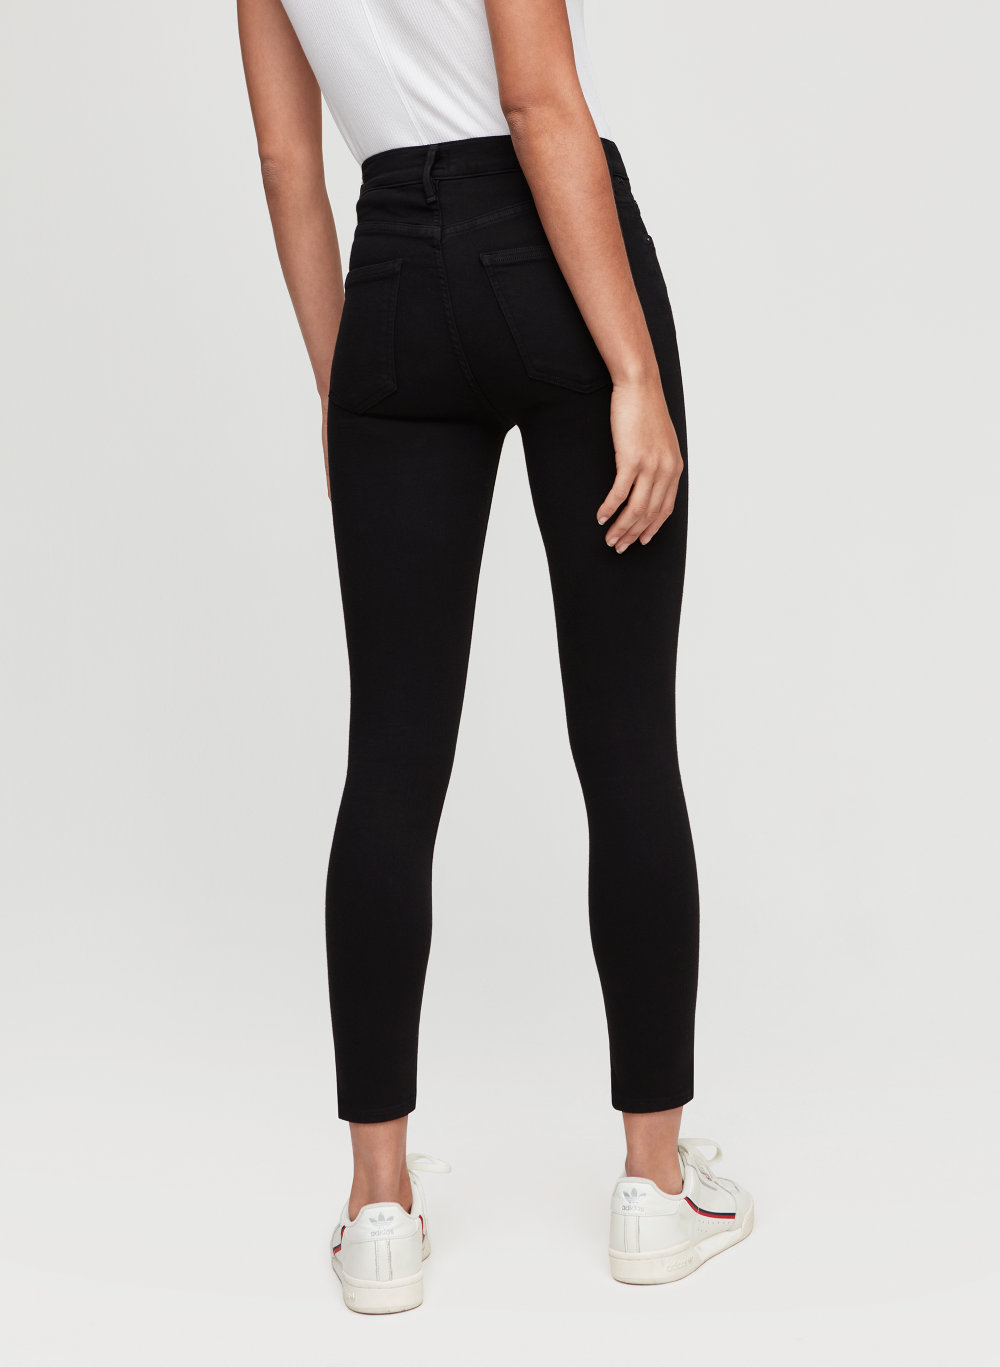 citizens of humanity rocket crop high rise skinny black